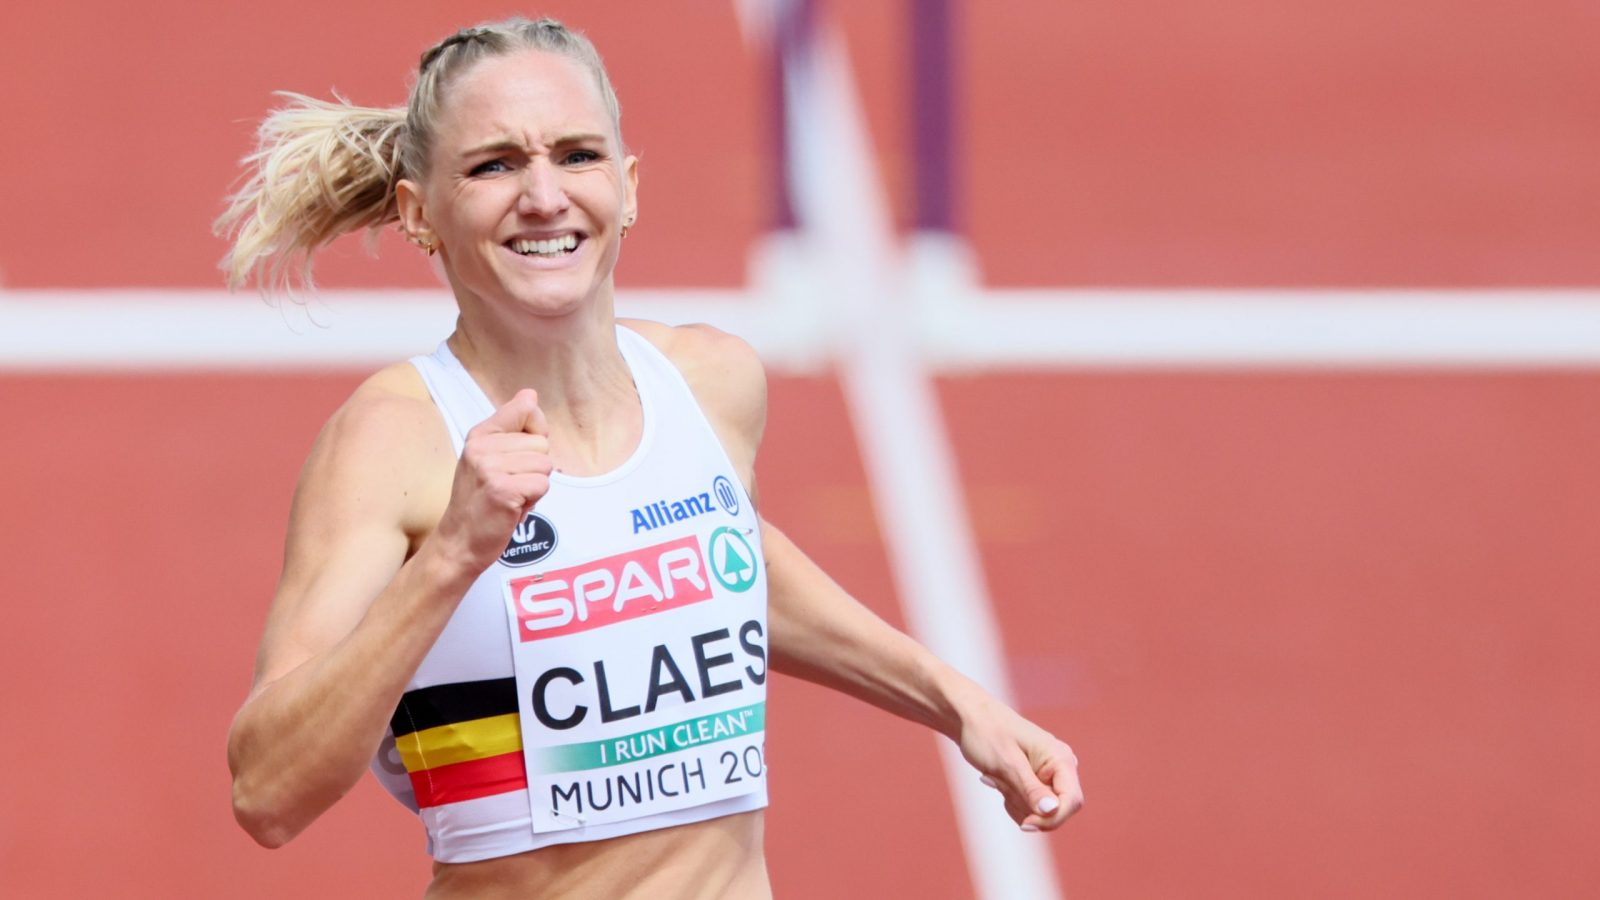 Belgian Hanne Claes pictured in action during the semi-finals of the women's 400m hurdles race at the European Championships athletics, at Munich 2022, Germany, on Thursday 18 August 2022. The second edition of the European Championships takes place from 11 to 22 August and features nine sports. BELGA PHOTO BENOIT DOPPAGNE